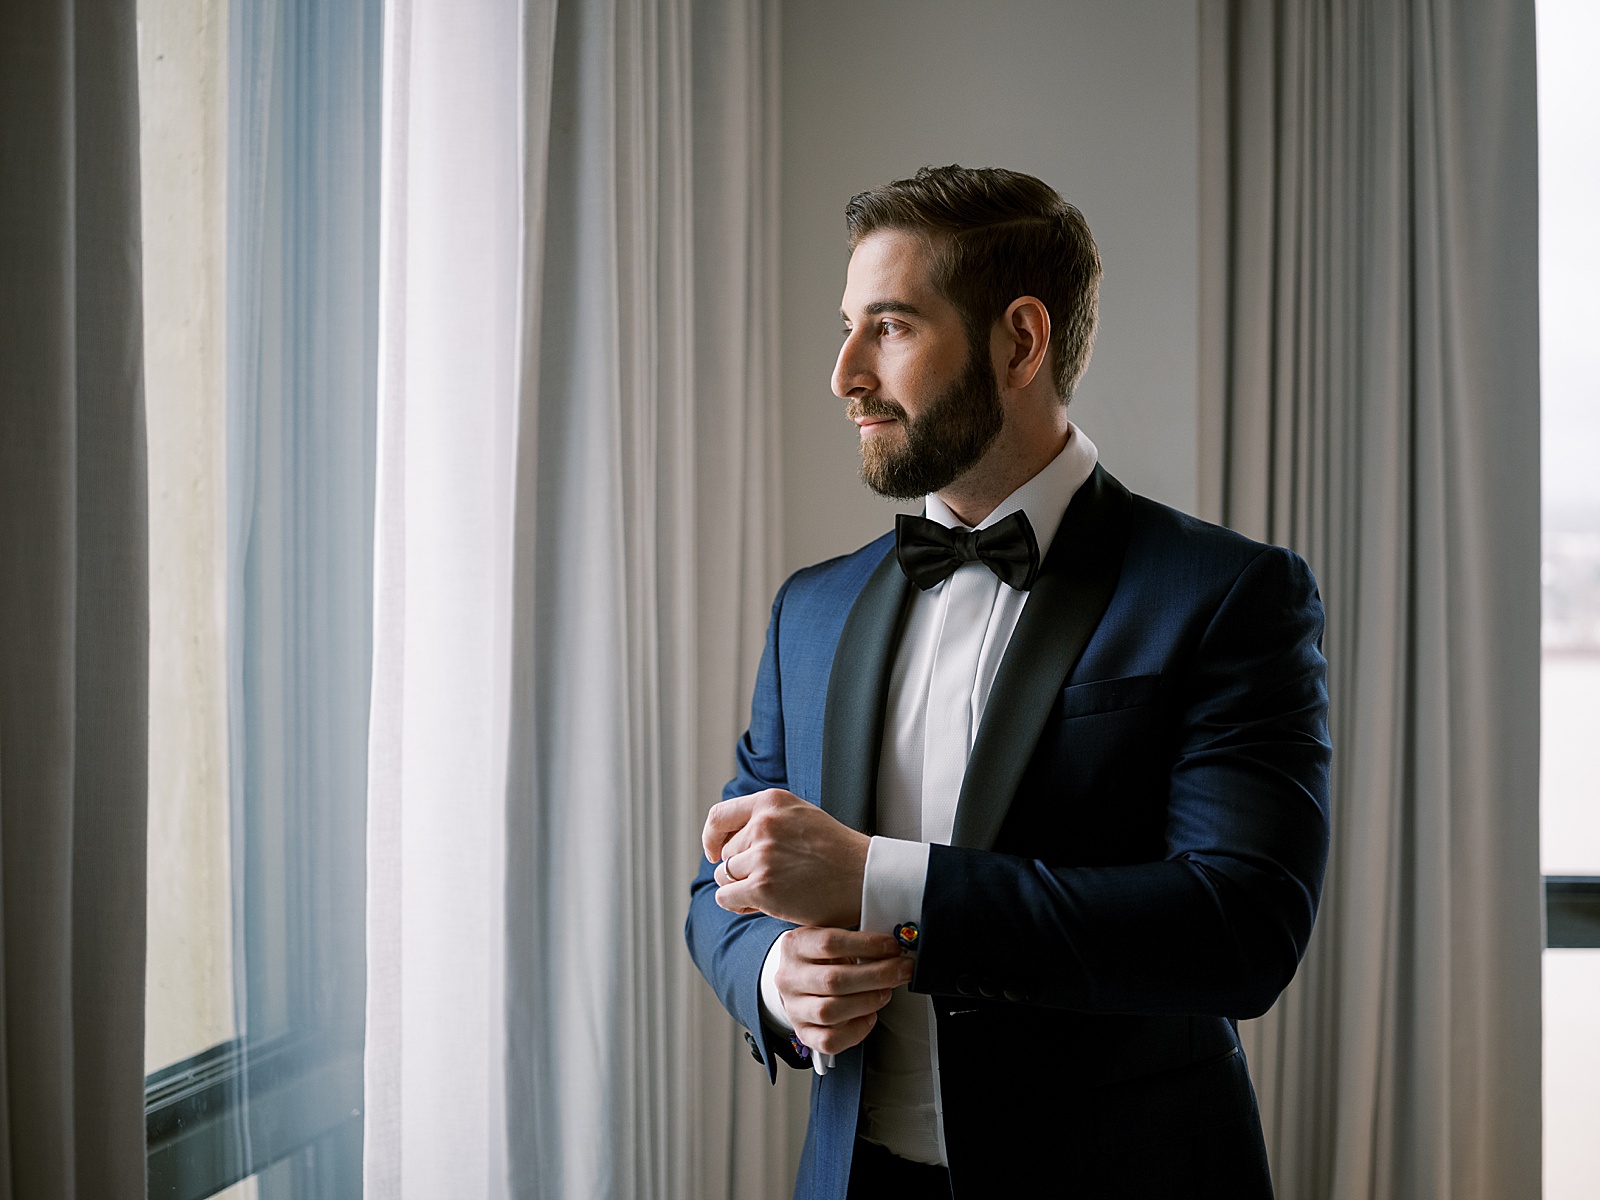 A groom buttons his cufflink while he looks out a window.